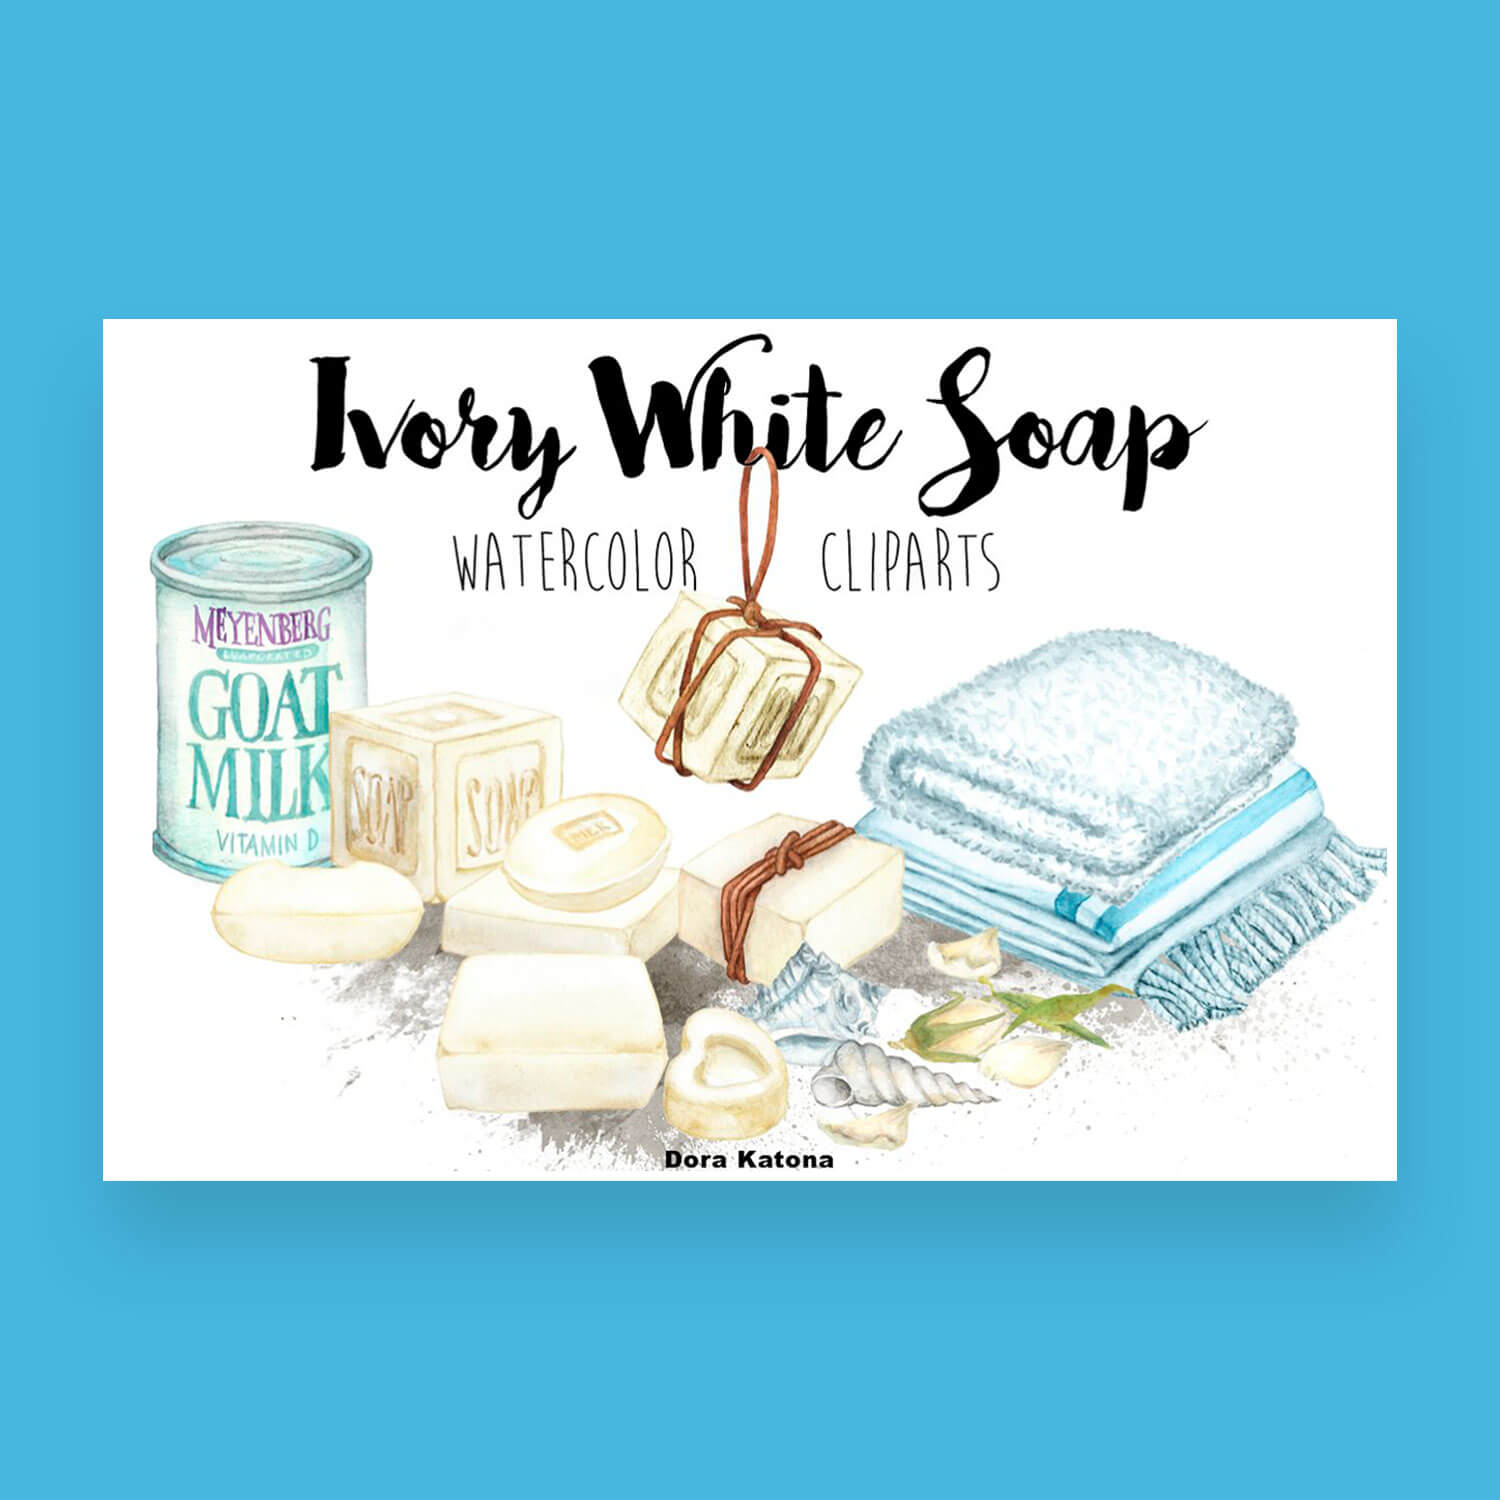 Ivory White Soap Watercolor Cliparts.